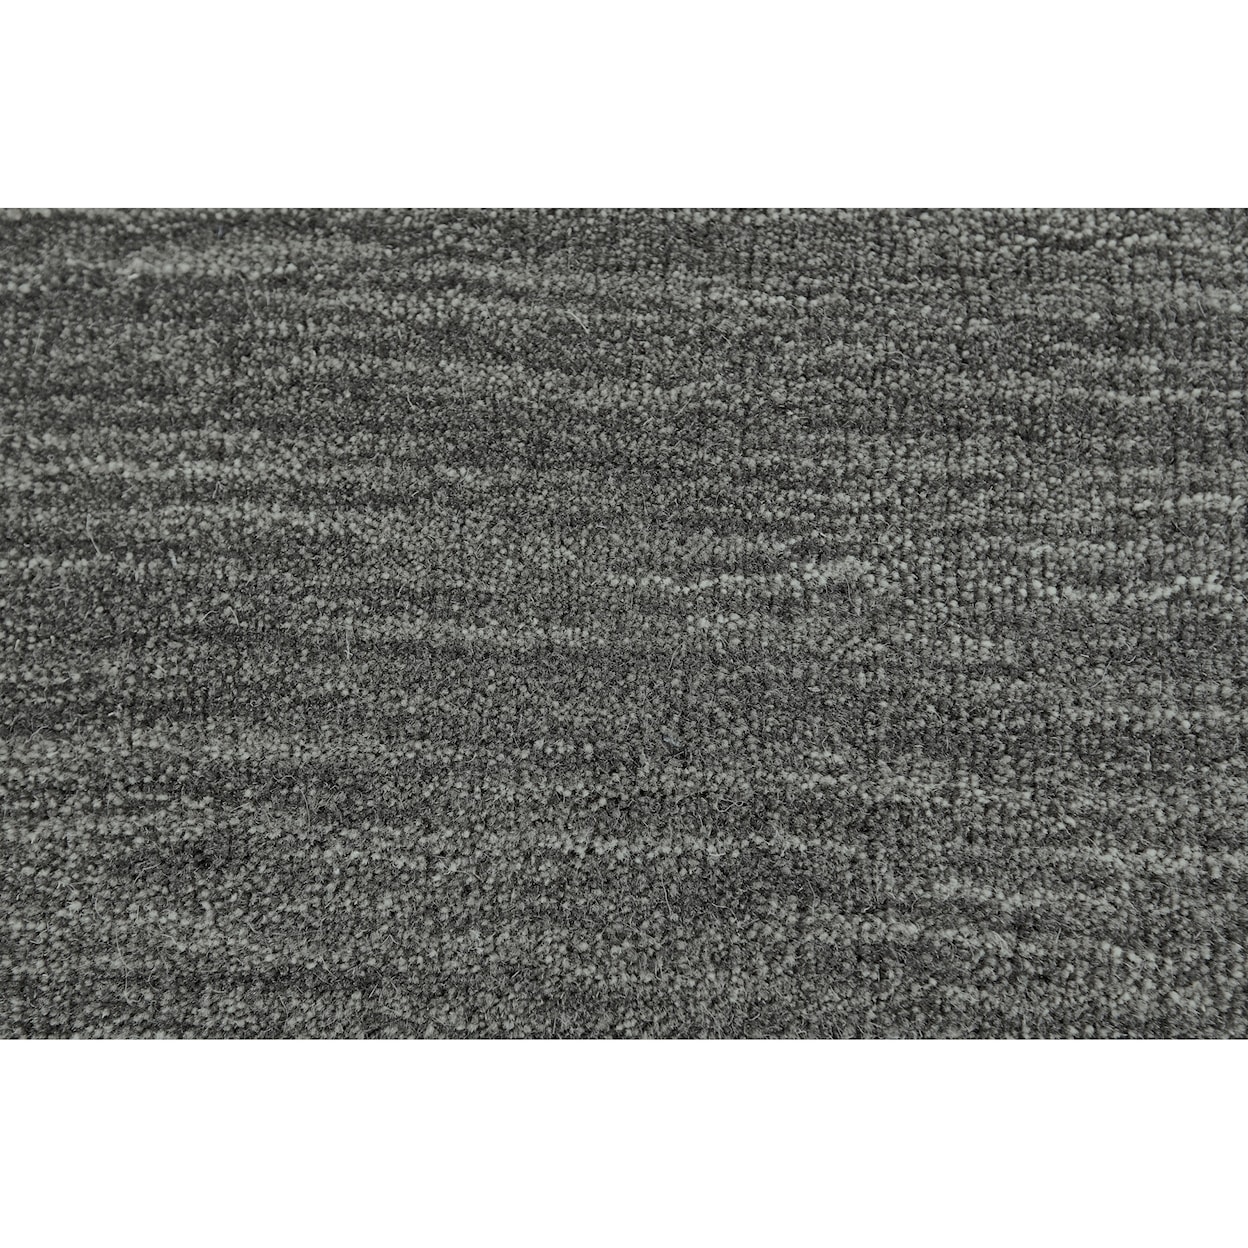 Feizy Rugs Luna Charcoal 5' x 8' Area Rug